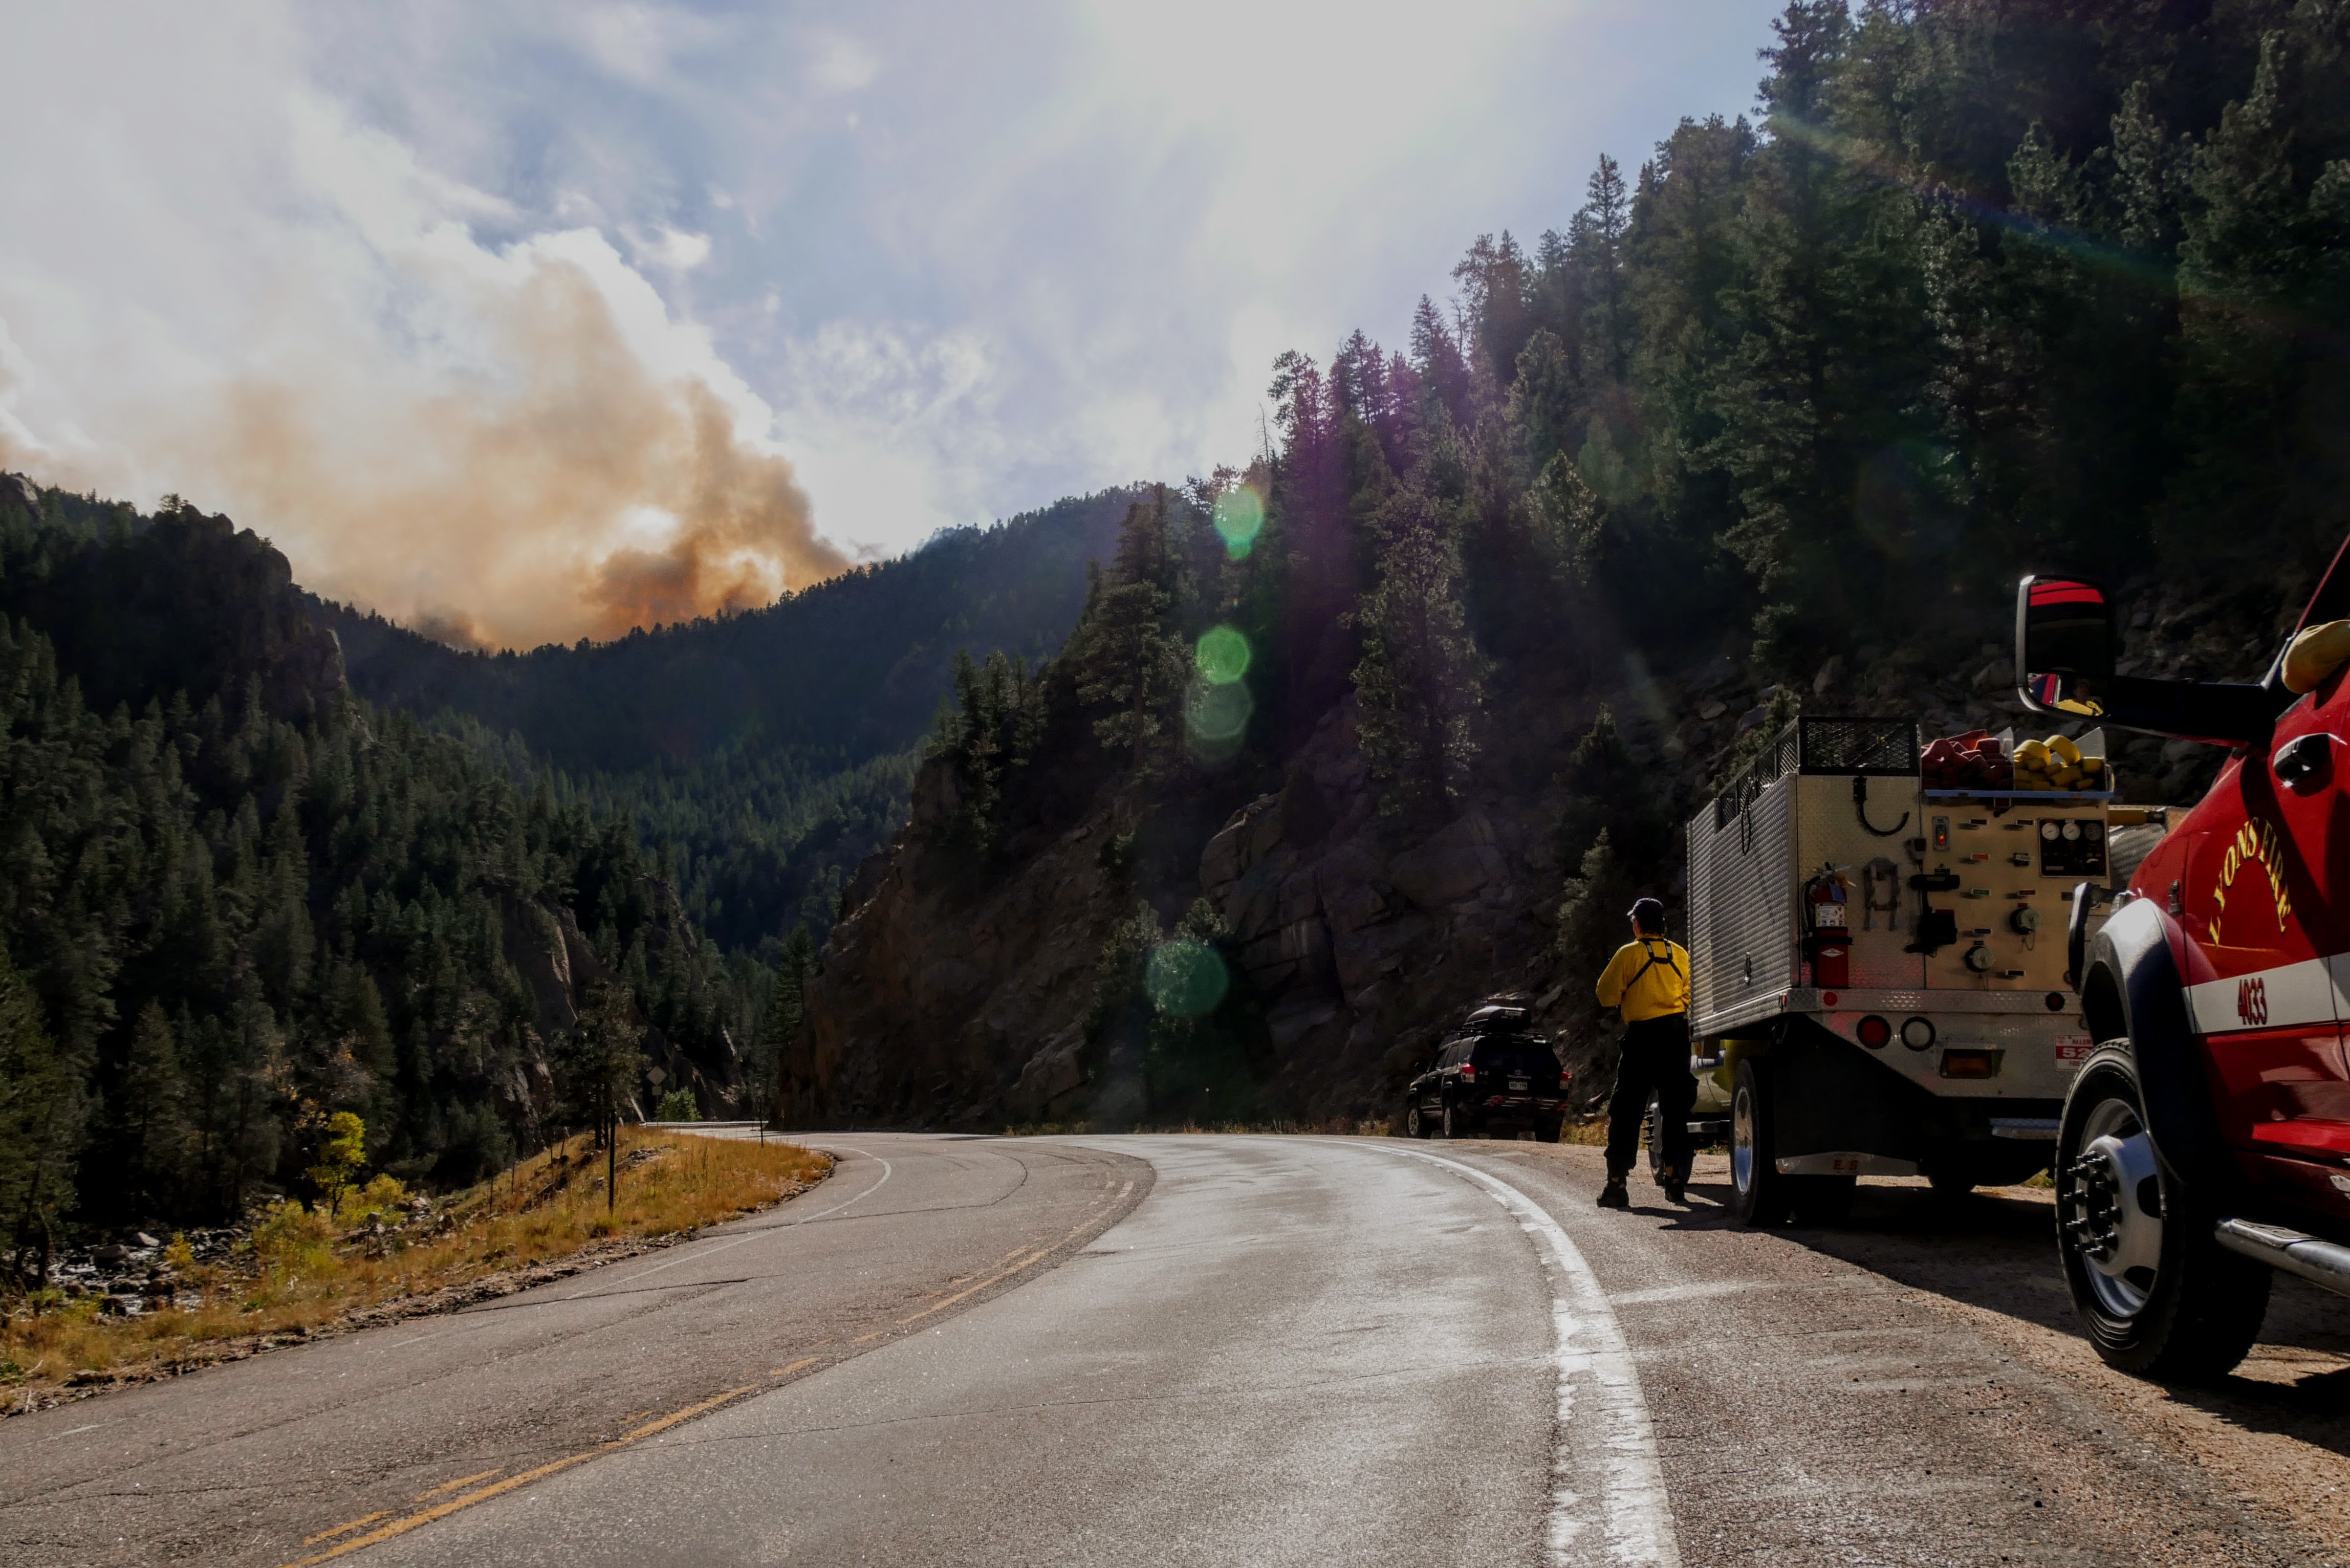 A firefighter looks at the Calwood Fire coming over a ridge, October 2020, Colorado